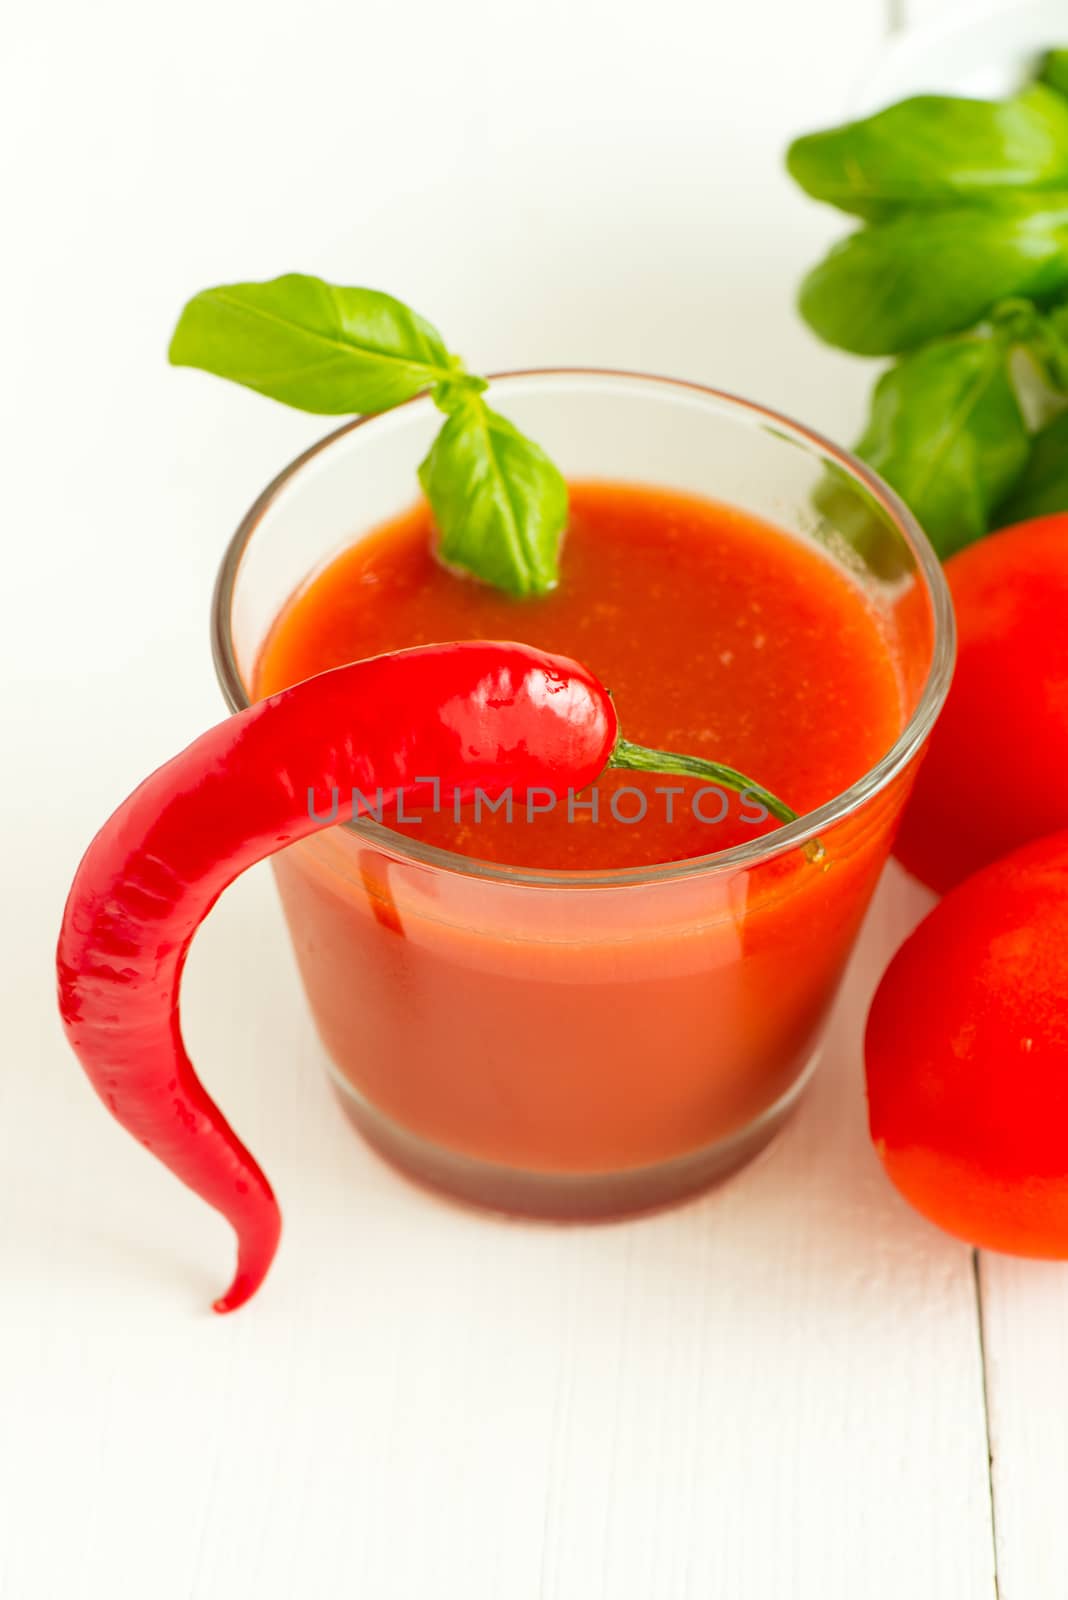 Tomato juice, chili pepper and basil leaf on white wooden background